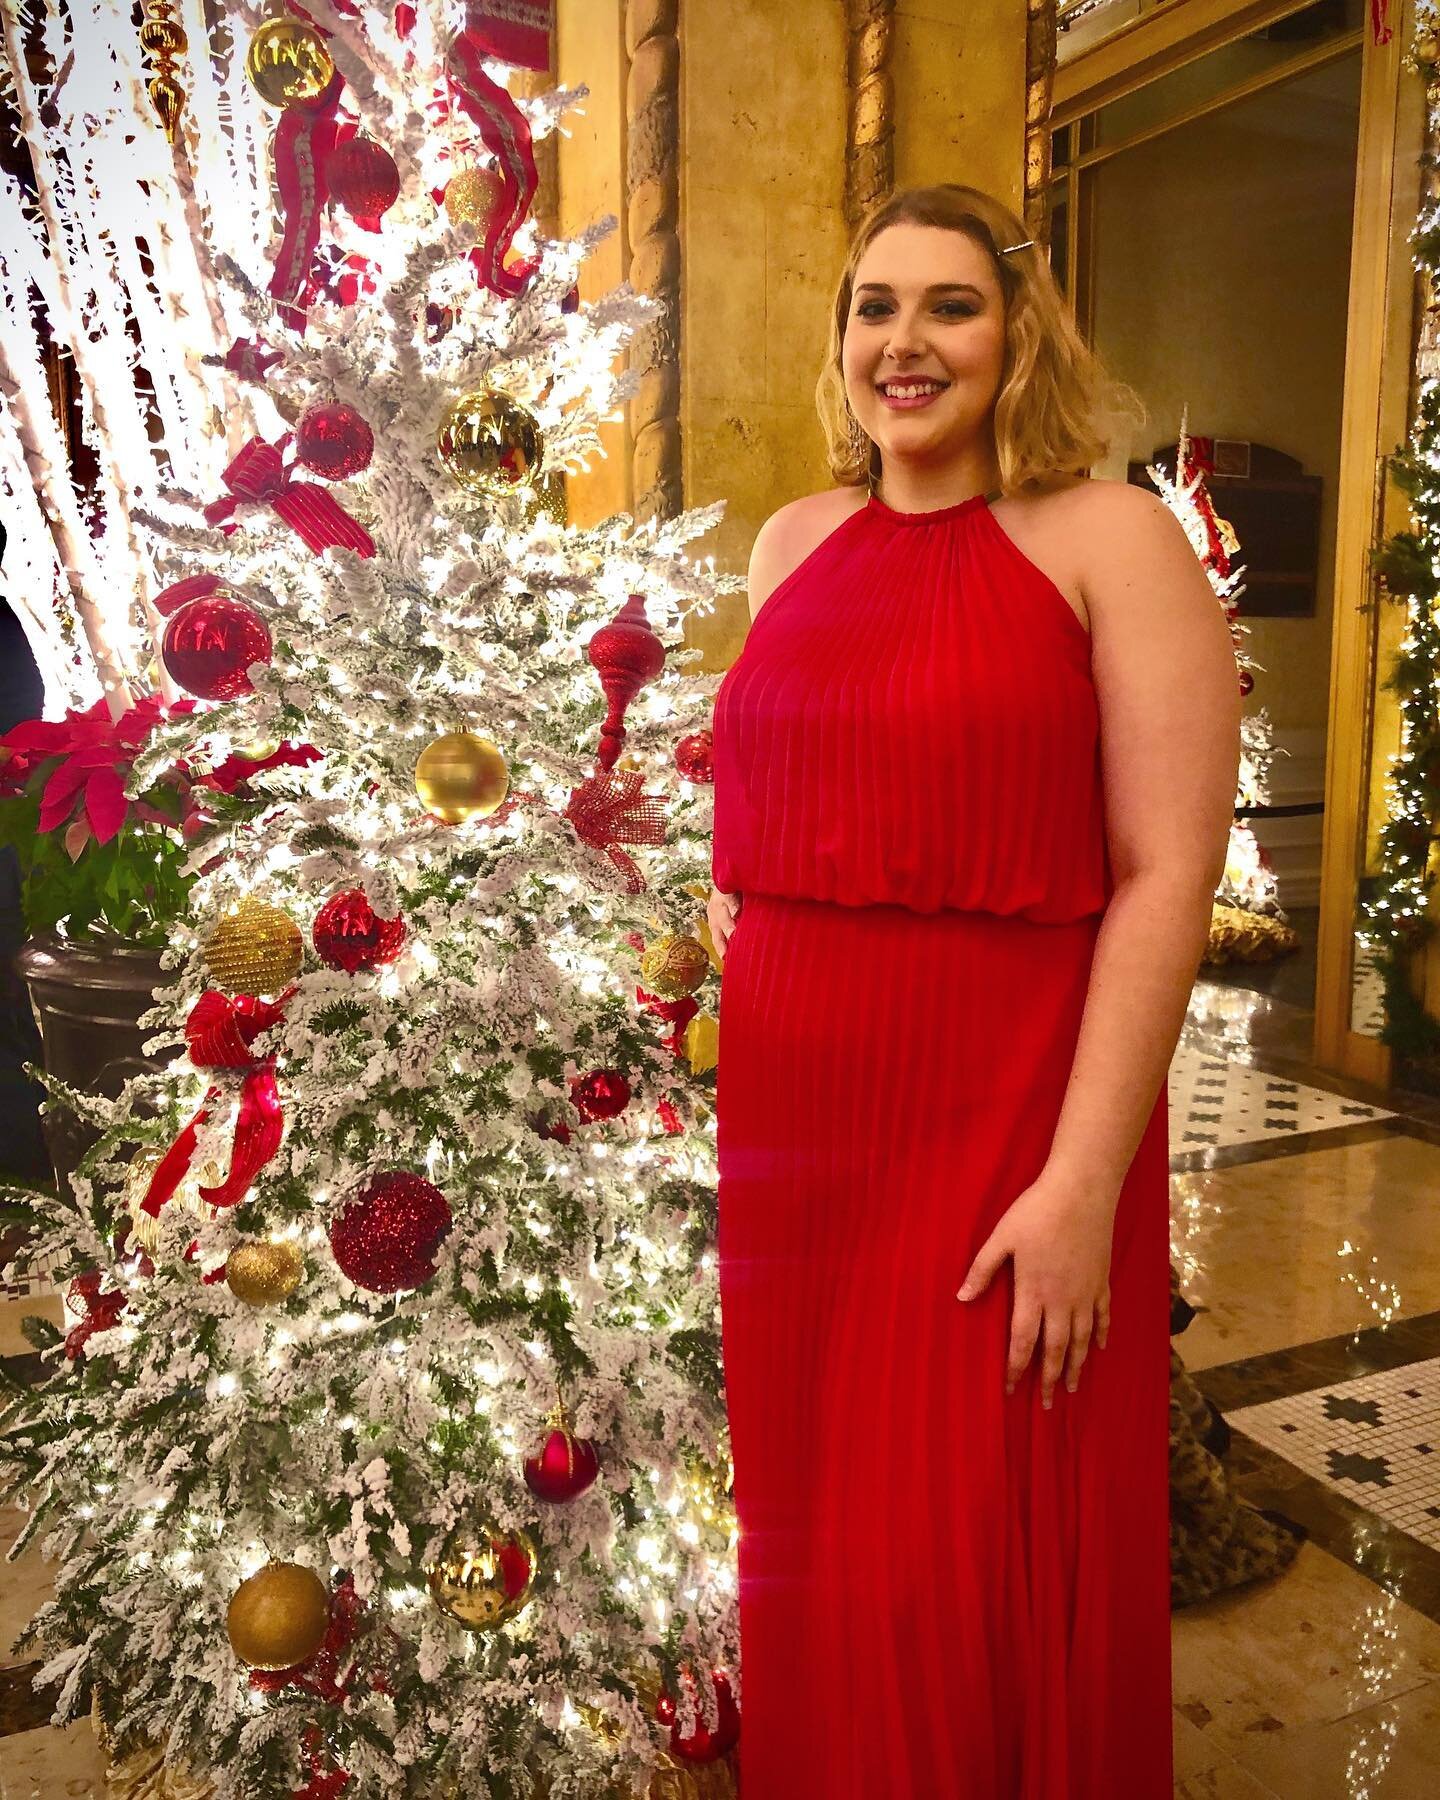 Happy Holidays Y'all! Ending the seasonal gigs with an awesome wedding last night at the Roosevelt Hotel in New Orleans. I just had to get a picture with the Christmas trees along with the other 3 million people 🎅🏻🕎